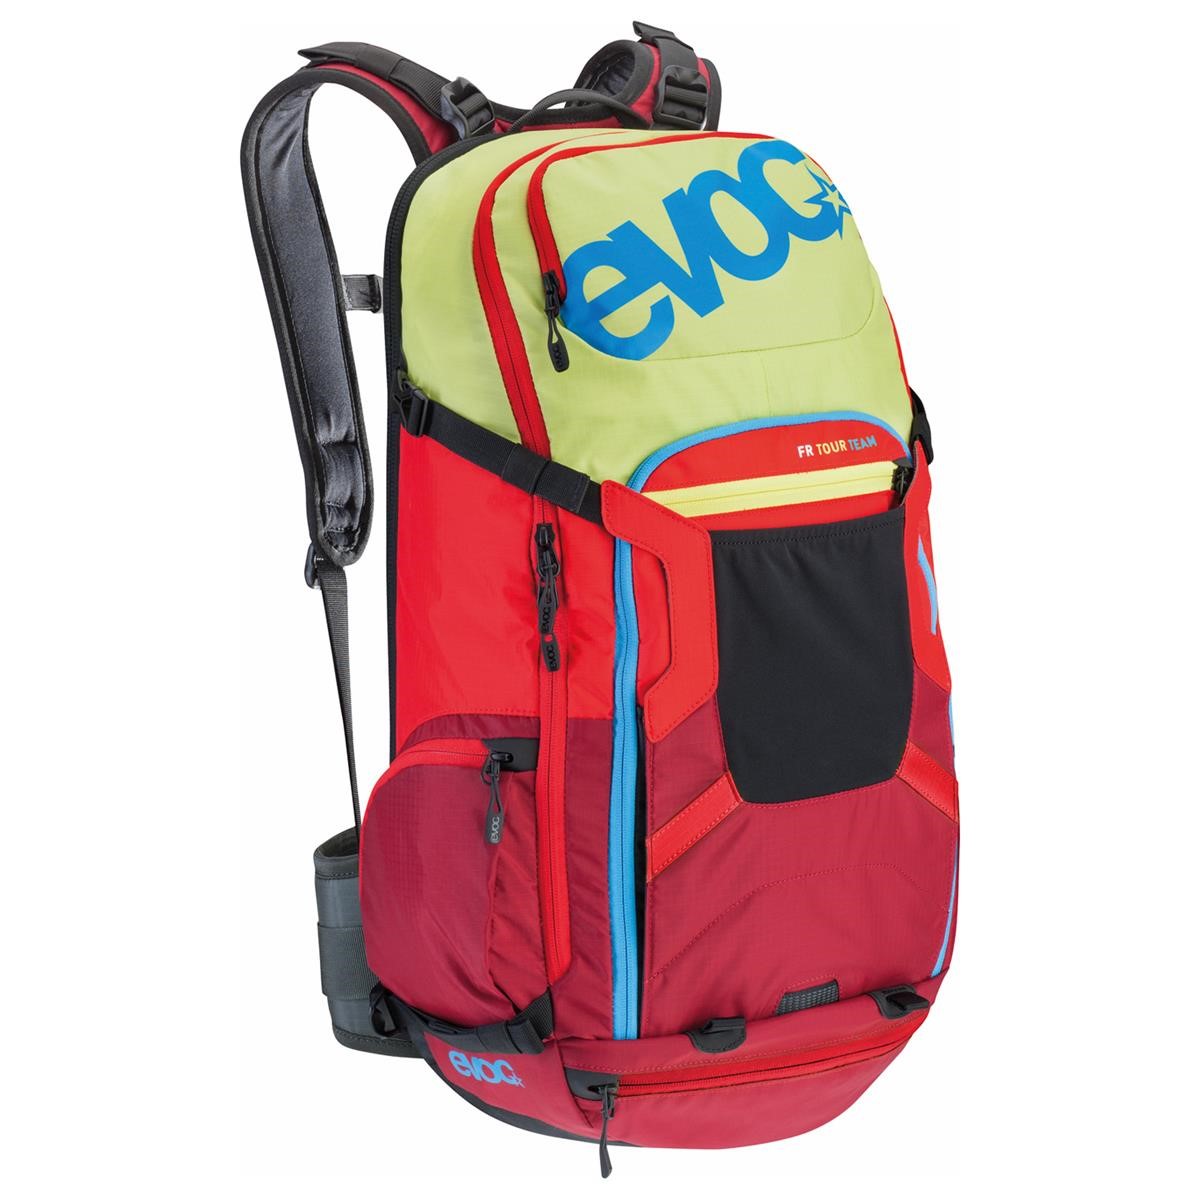 Evoc Protektor Backpack with Hydration System Compartment FR Tour Team - Lime/Red/Ruby, 30 Liter